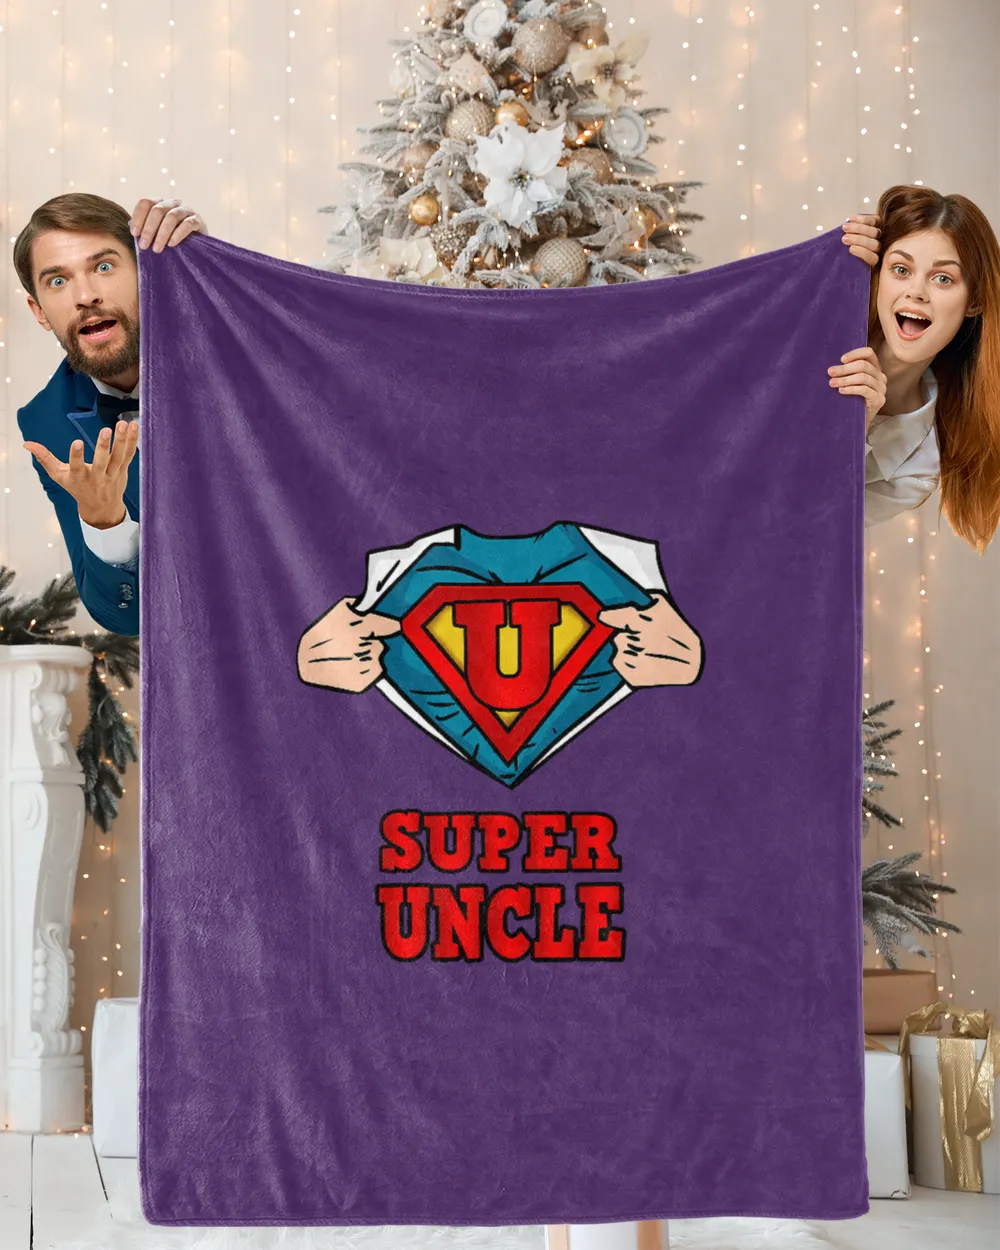 Super uncle Superhero Shirt - Great gift from niece and neph